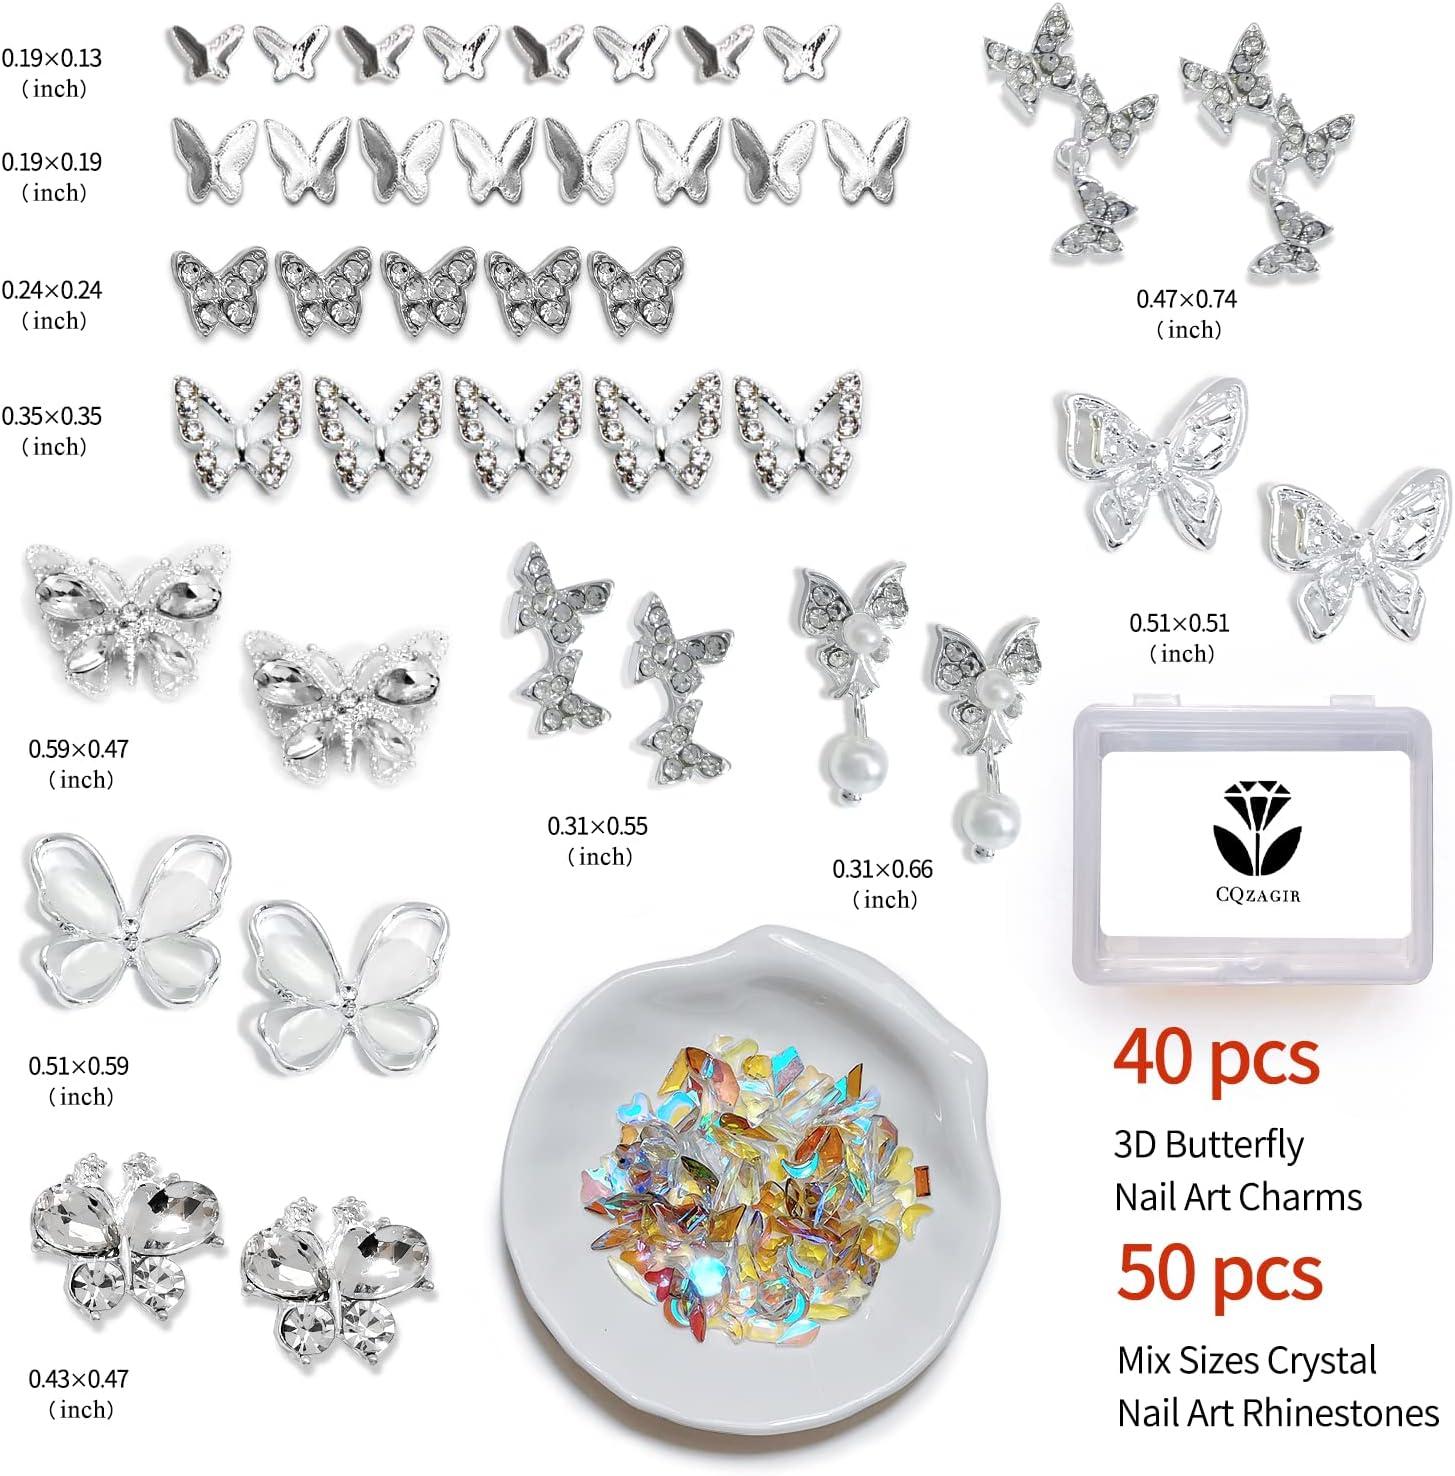 90 PCS 3D Butterfly Nail Rhinestones Charms Sliver Metal Acrylic